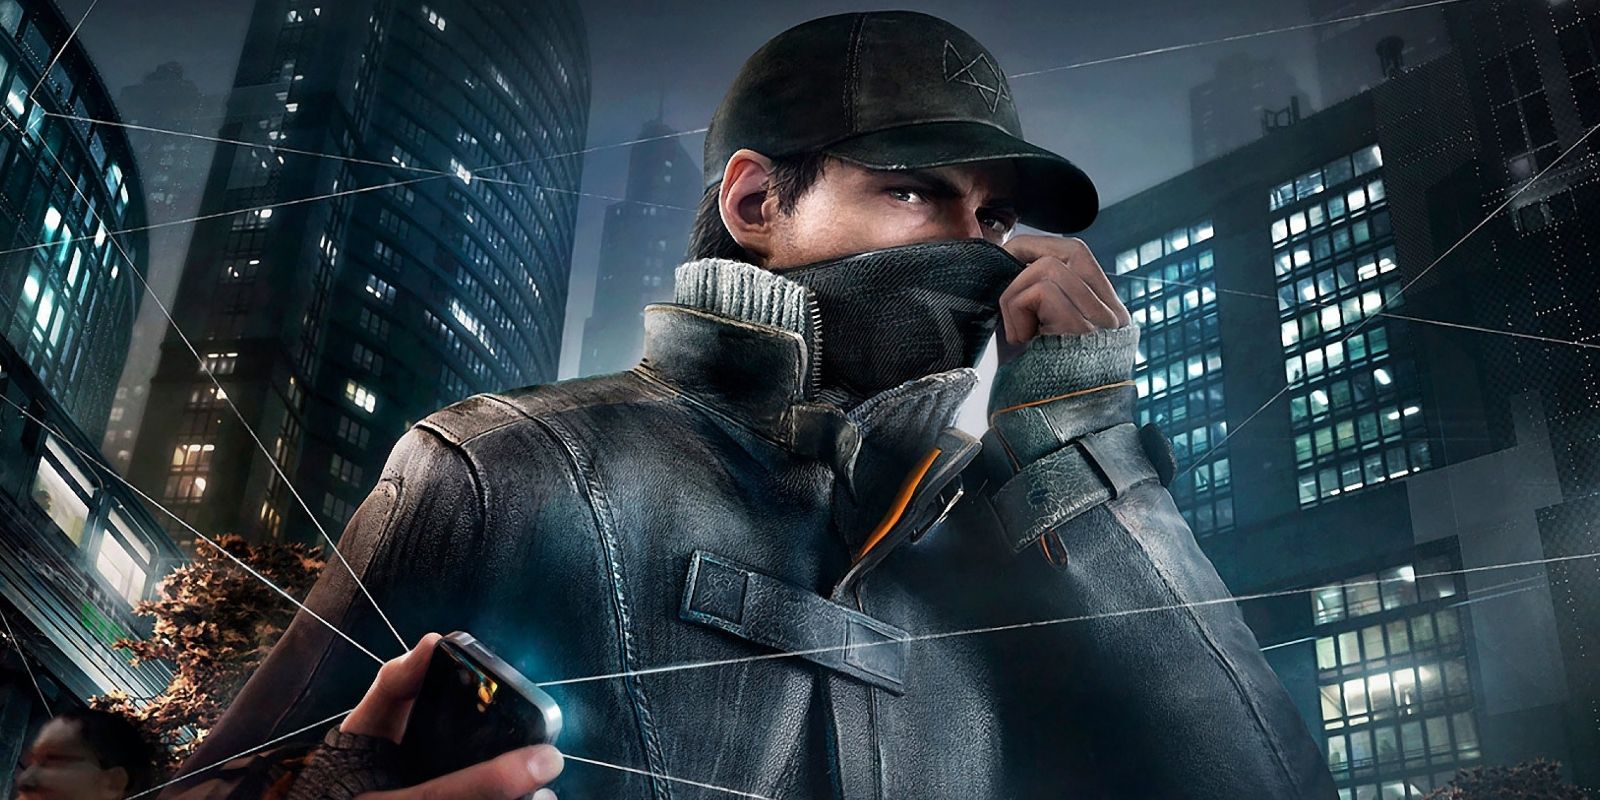 Aiden Pearce hacking with his phone in Watch Dogs game